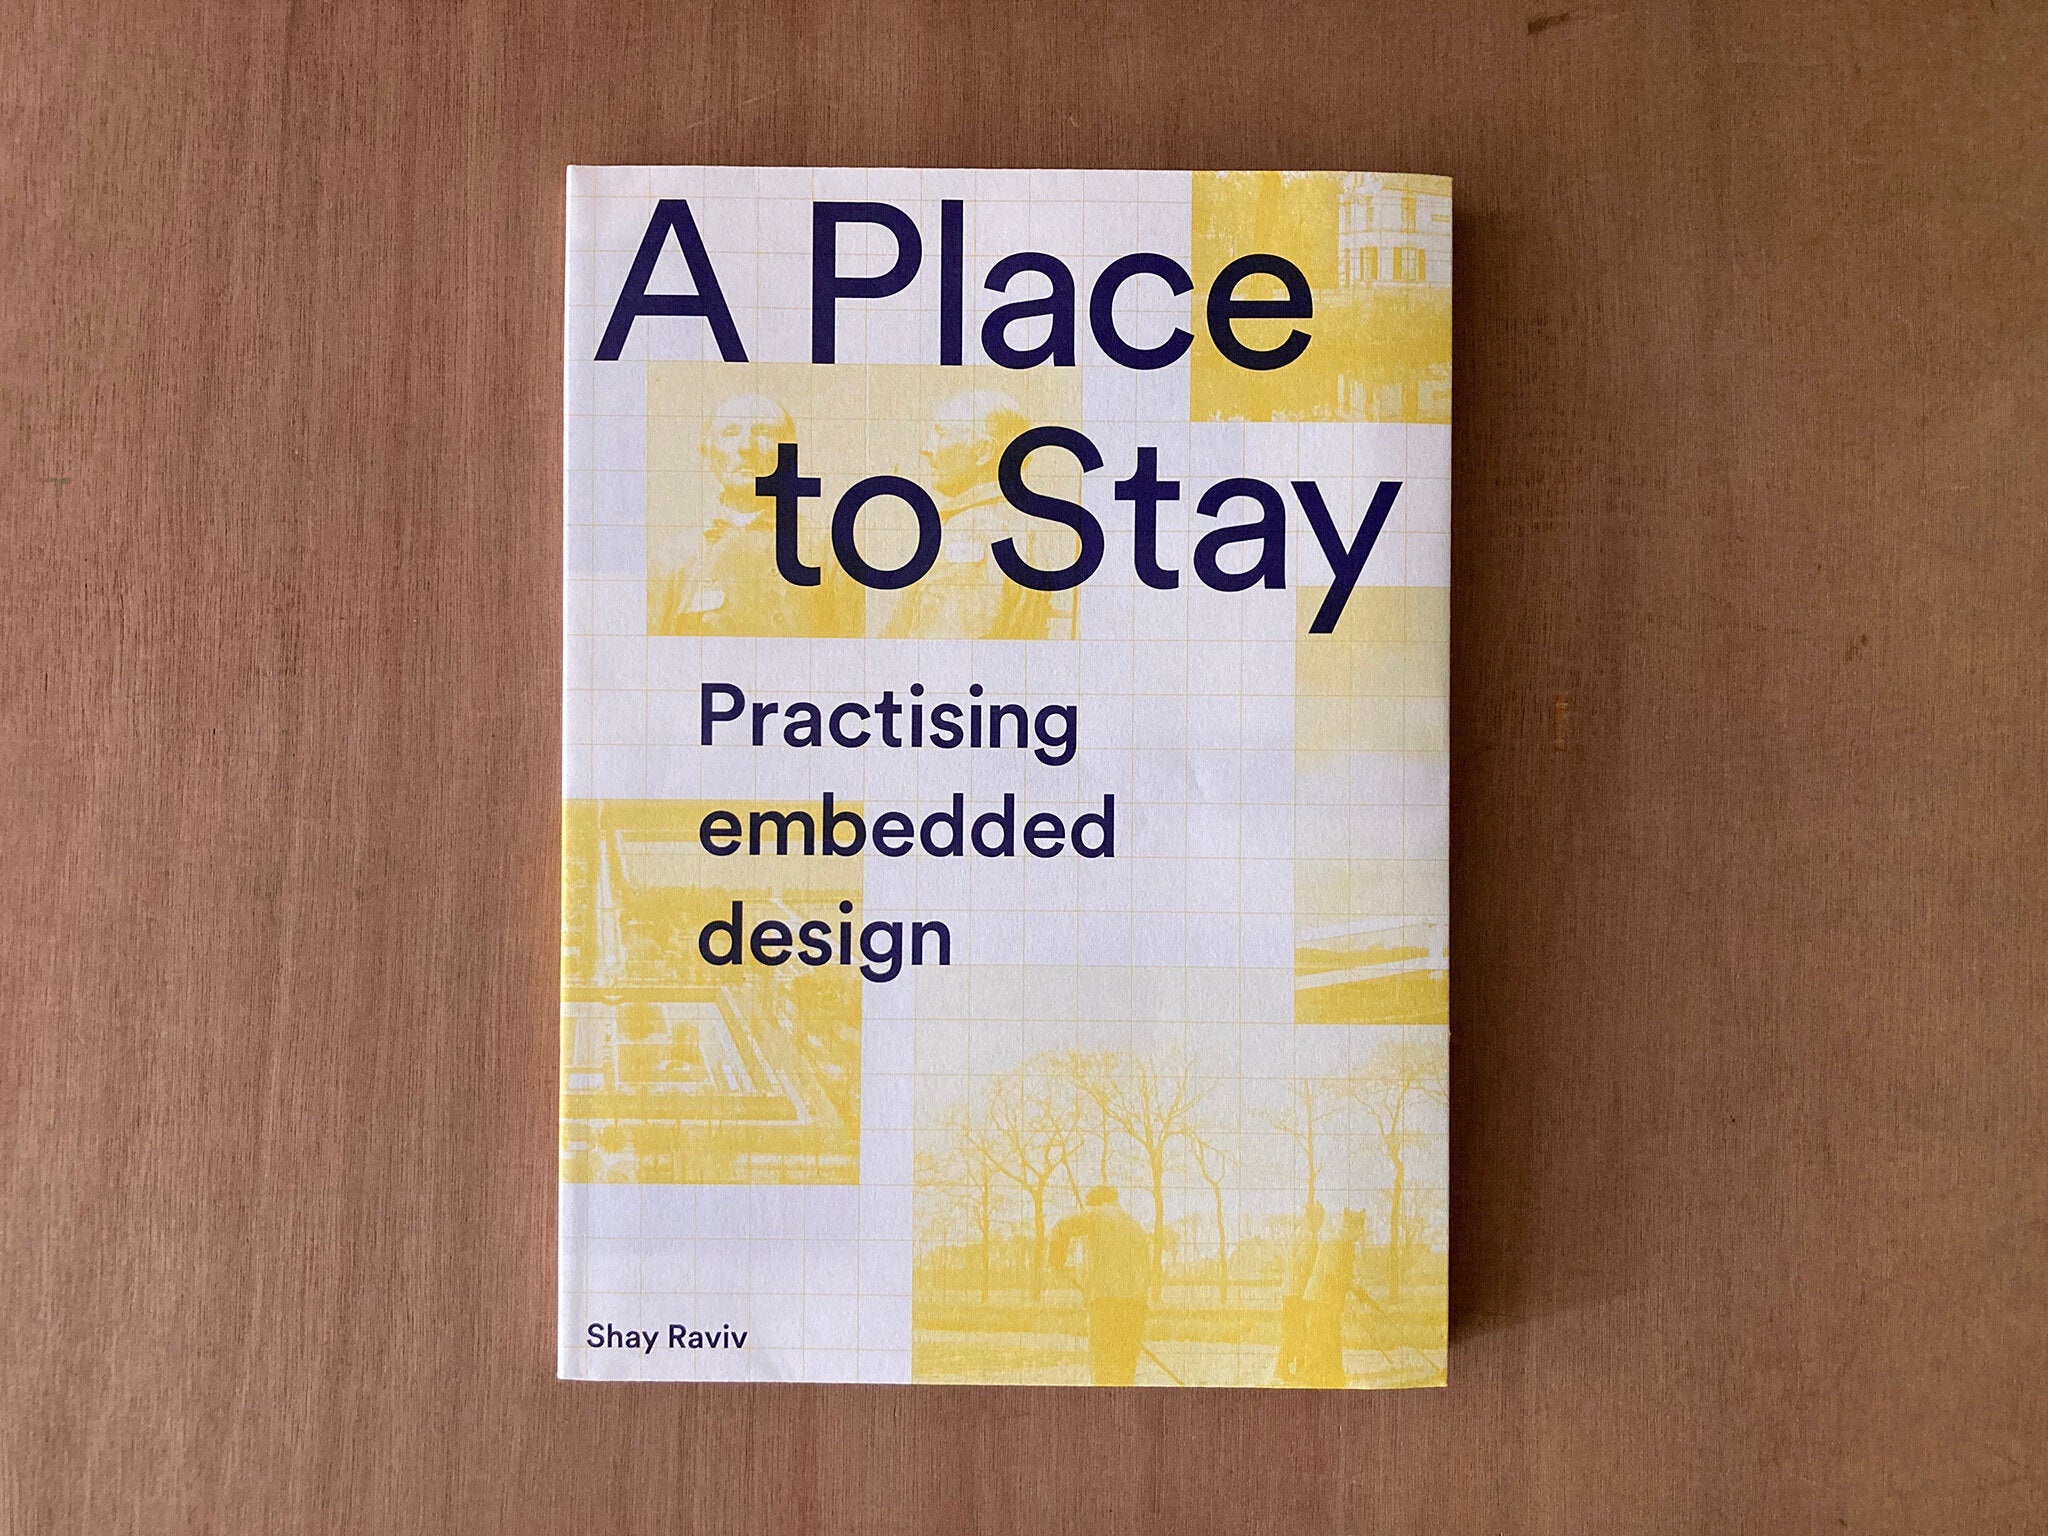 A PLACE TO STAY: PRACTISING EMBEDDED DESIGN by Shay Raviv